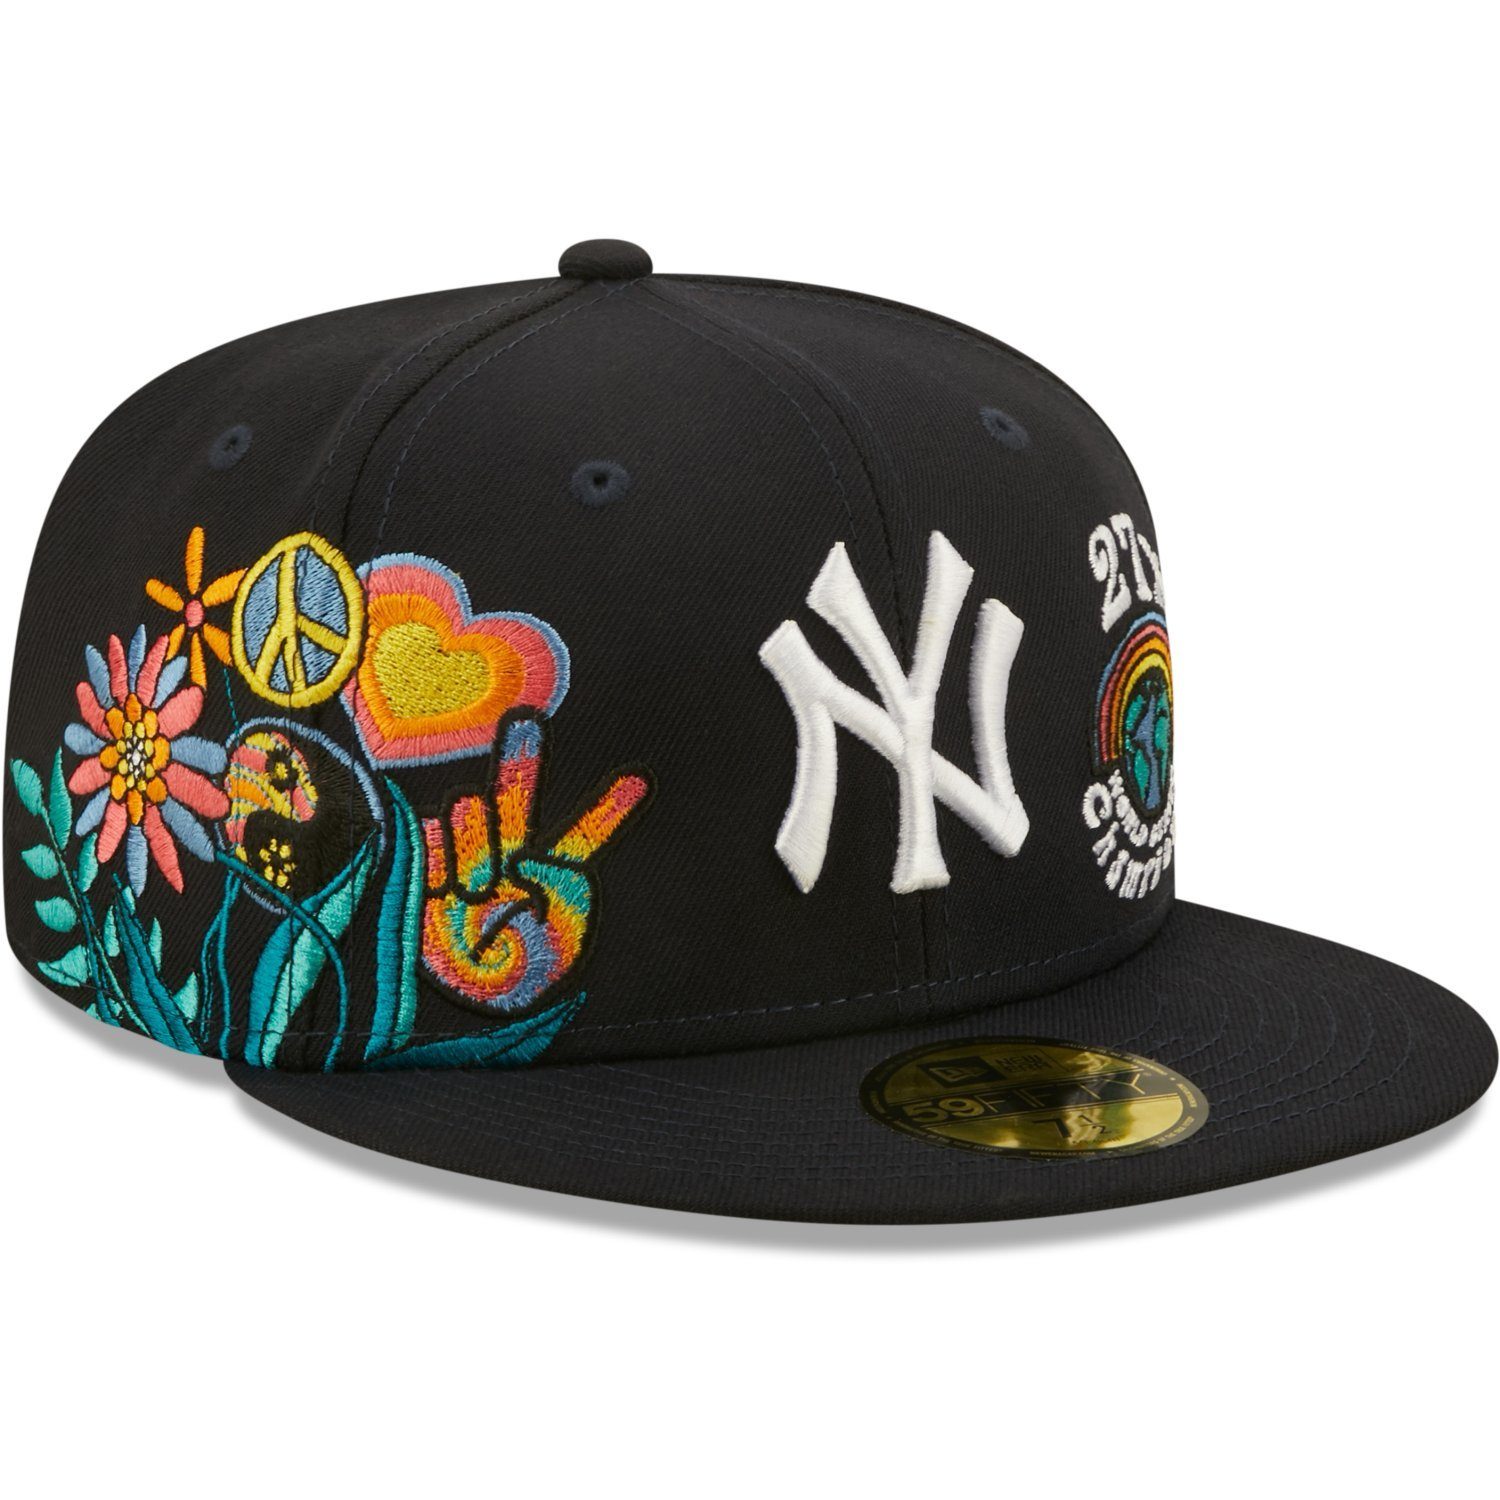 Era Yankees GROOVY New 59Fifty Cap New York Fitted